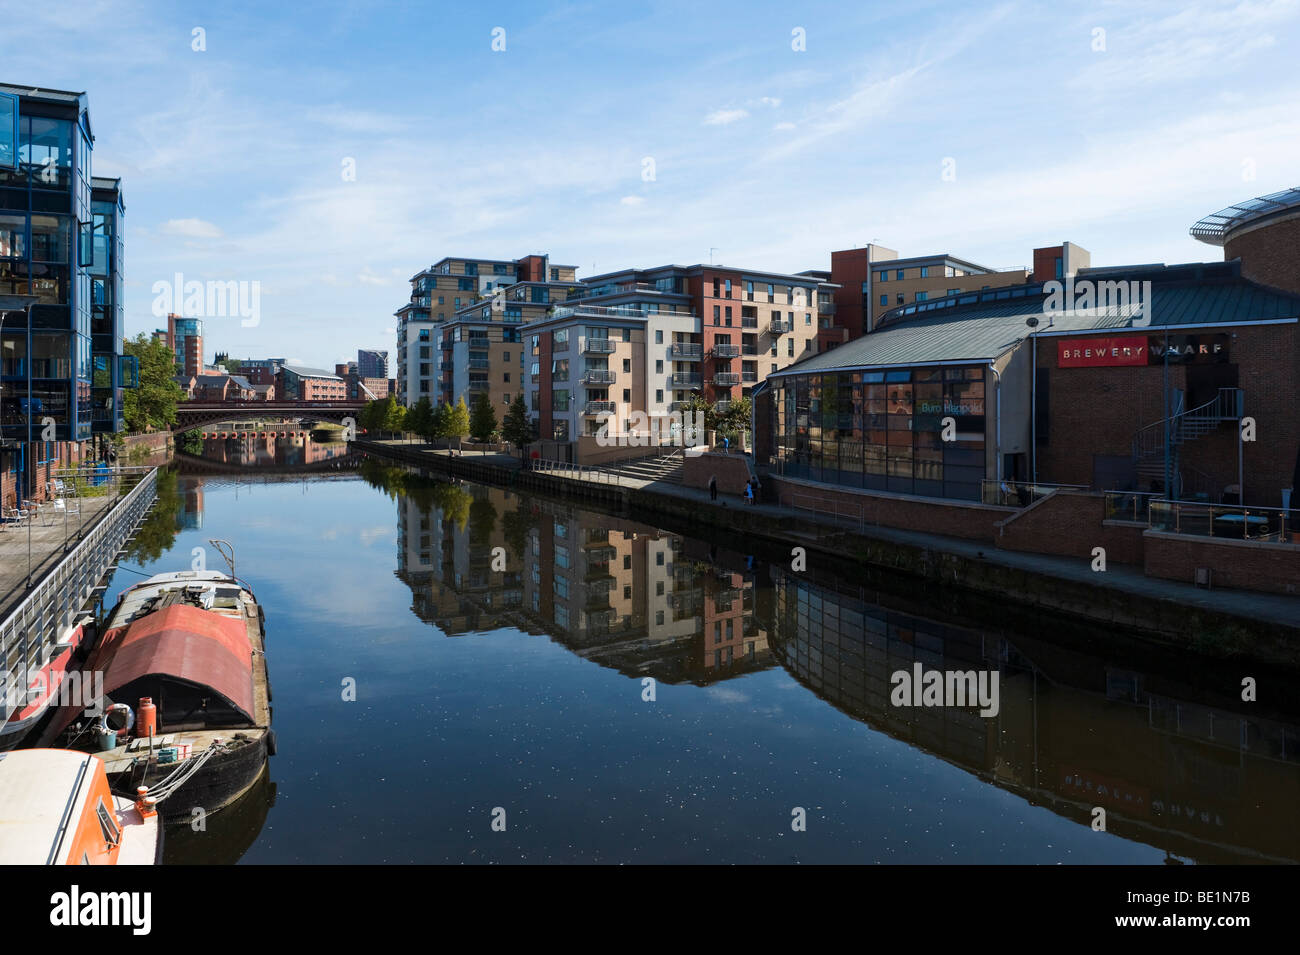 River Aire at Brewery Wharf, Leeds, West Yorkshire, England Stock Photo